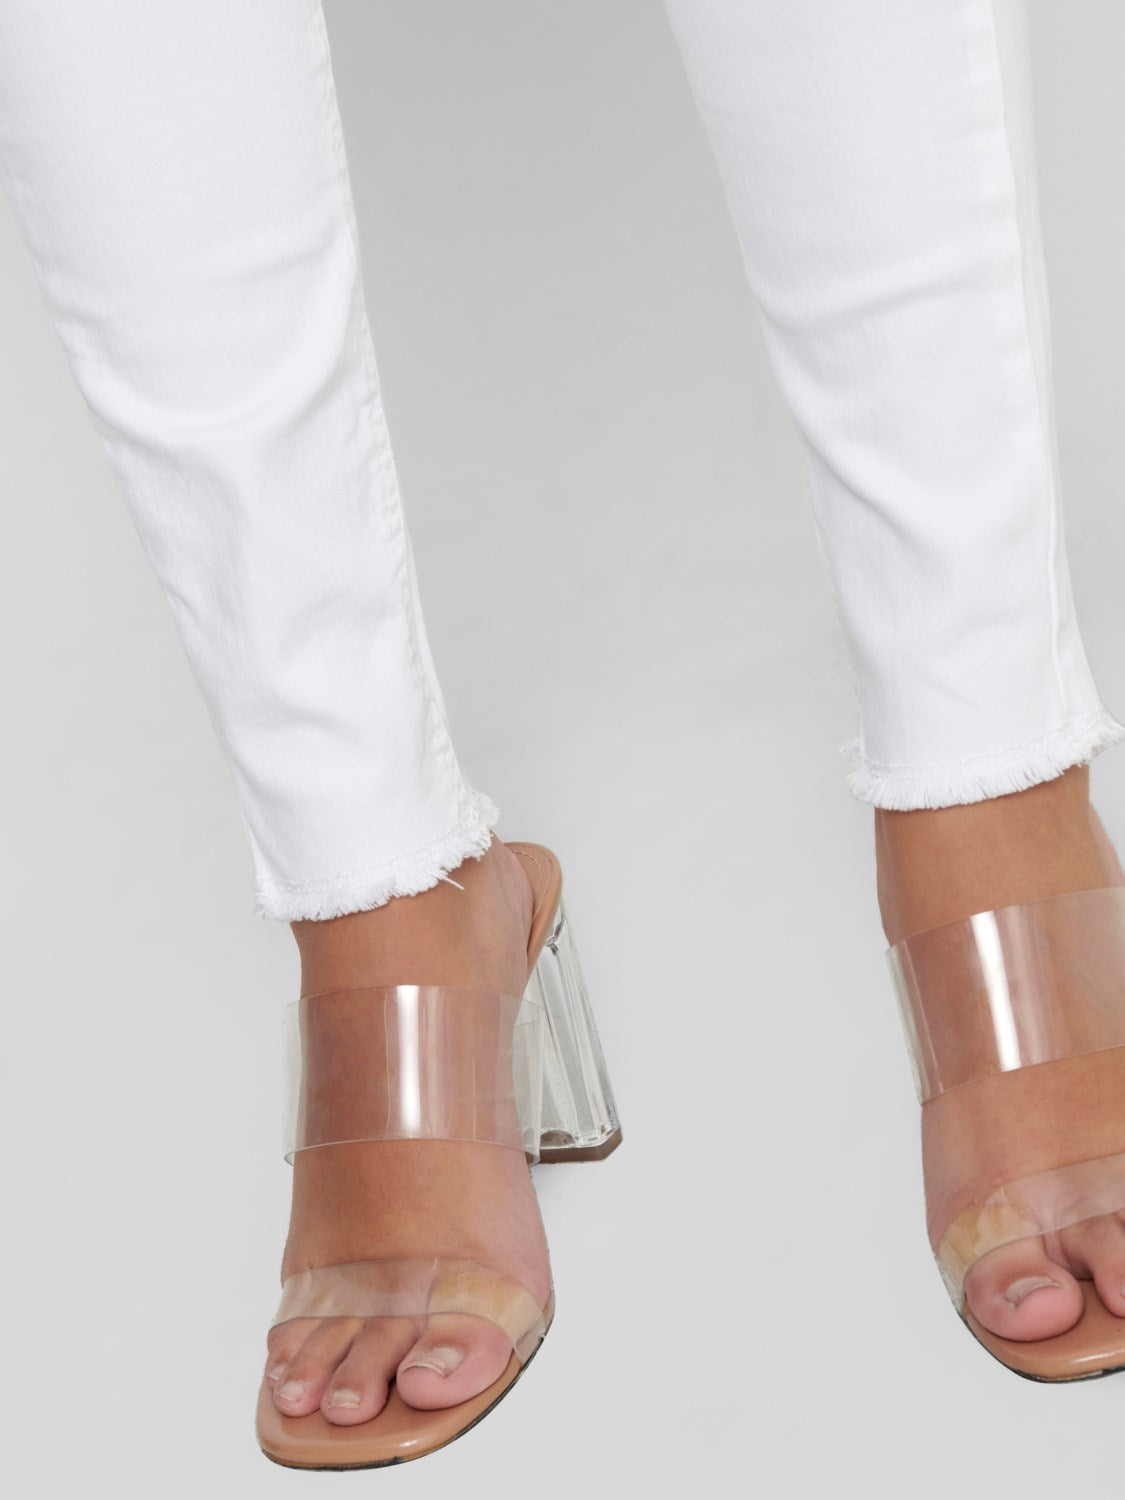 ONLY | Blush Ankle Skinny Fit Jeans | White